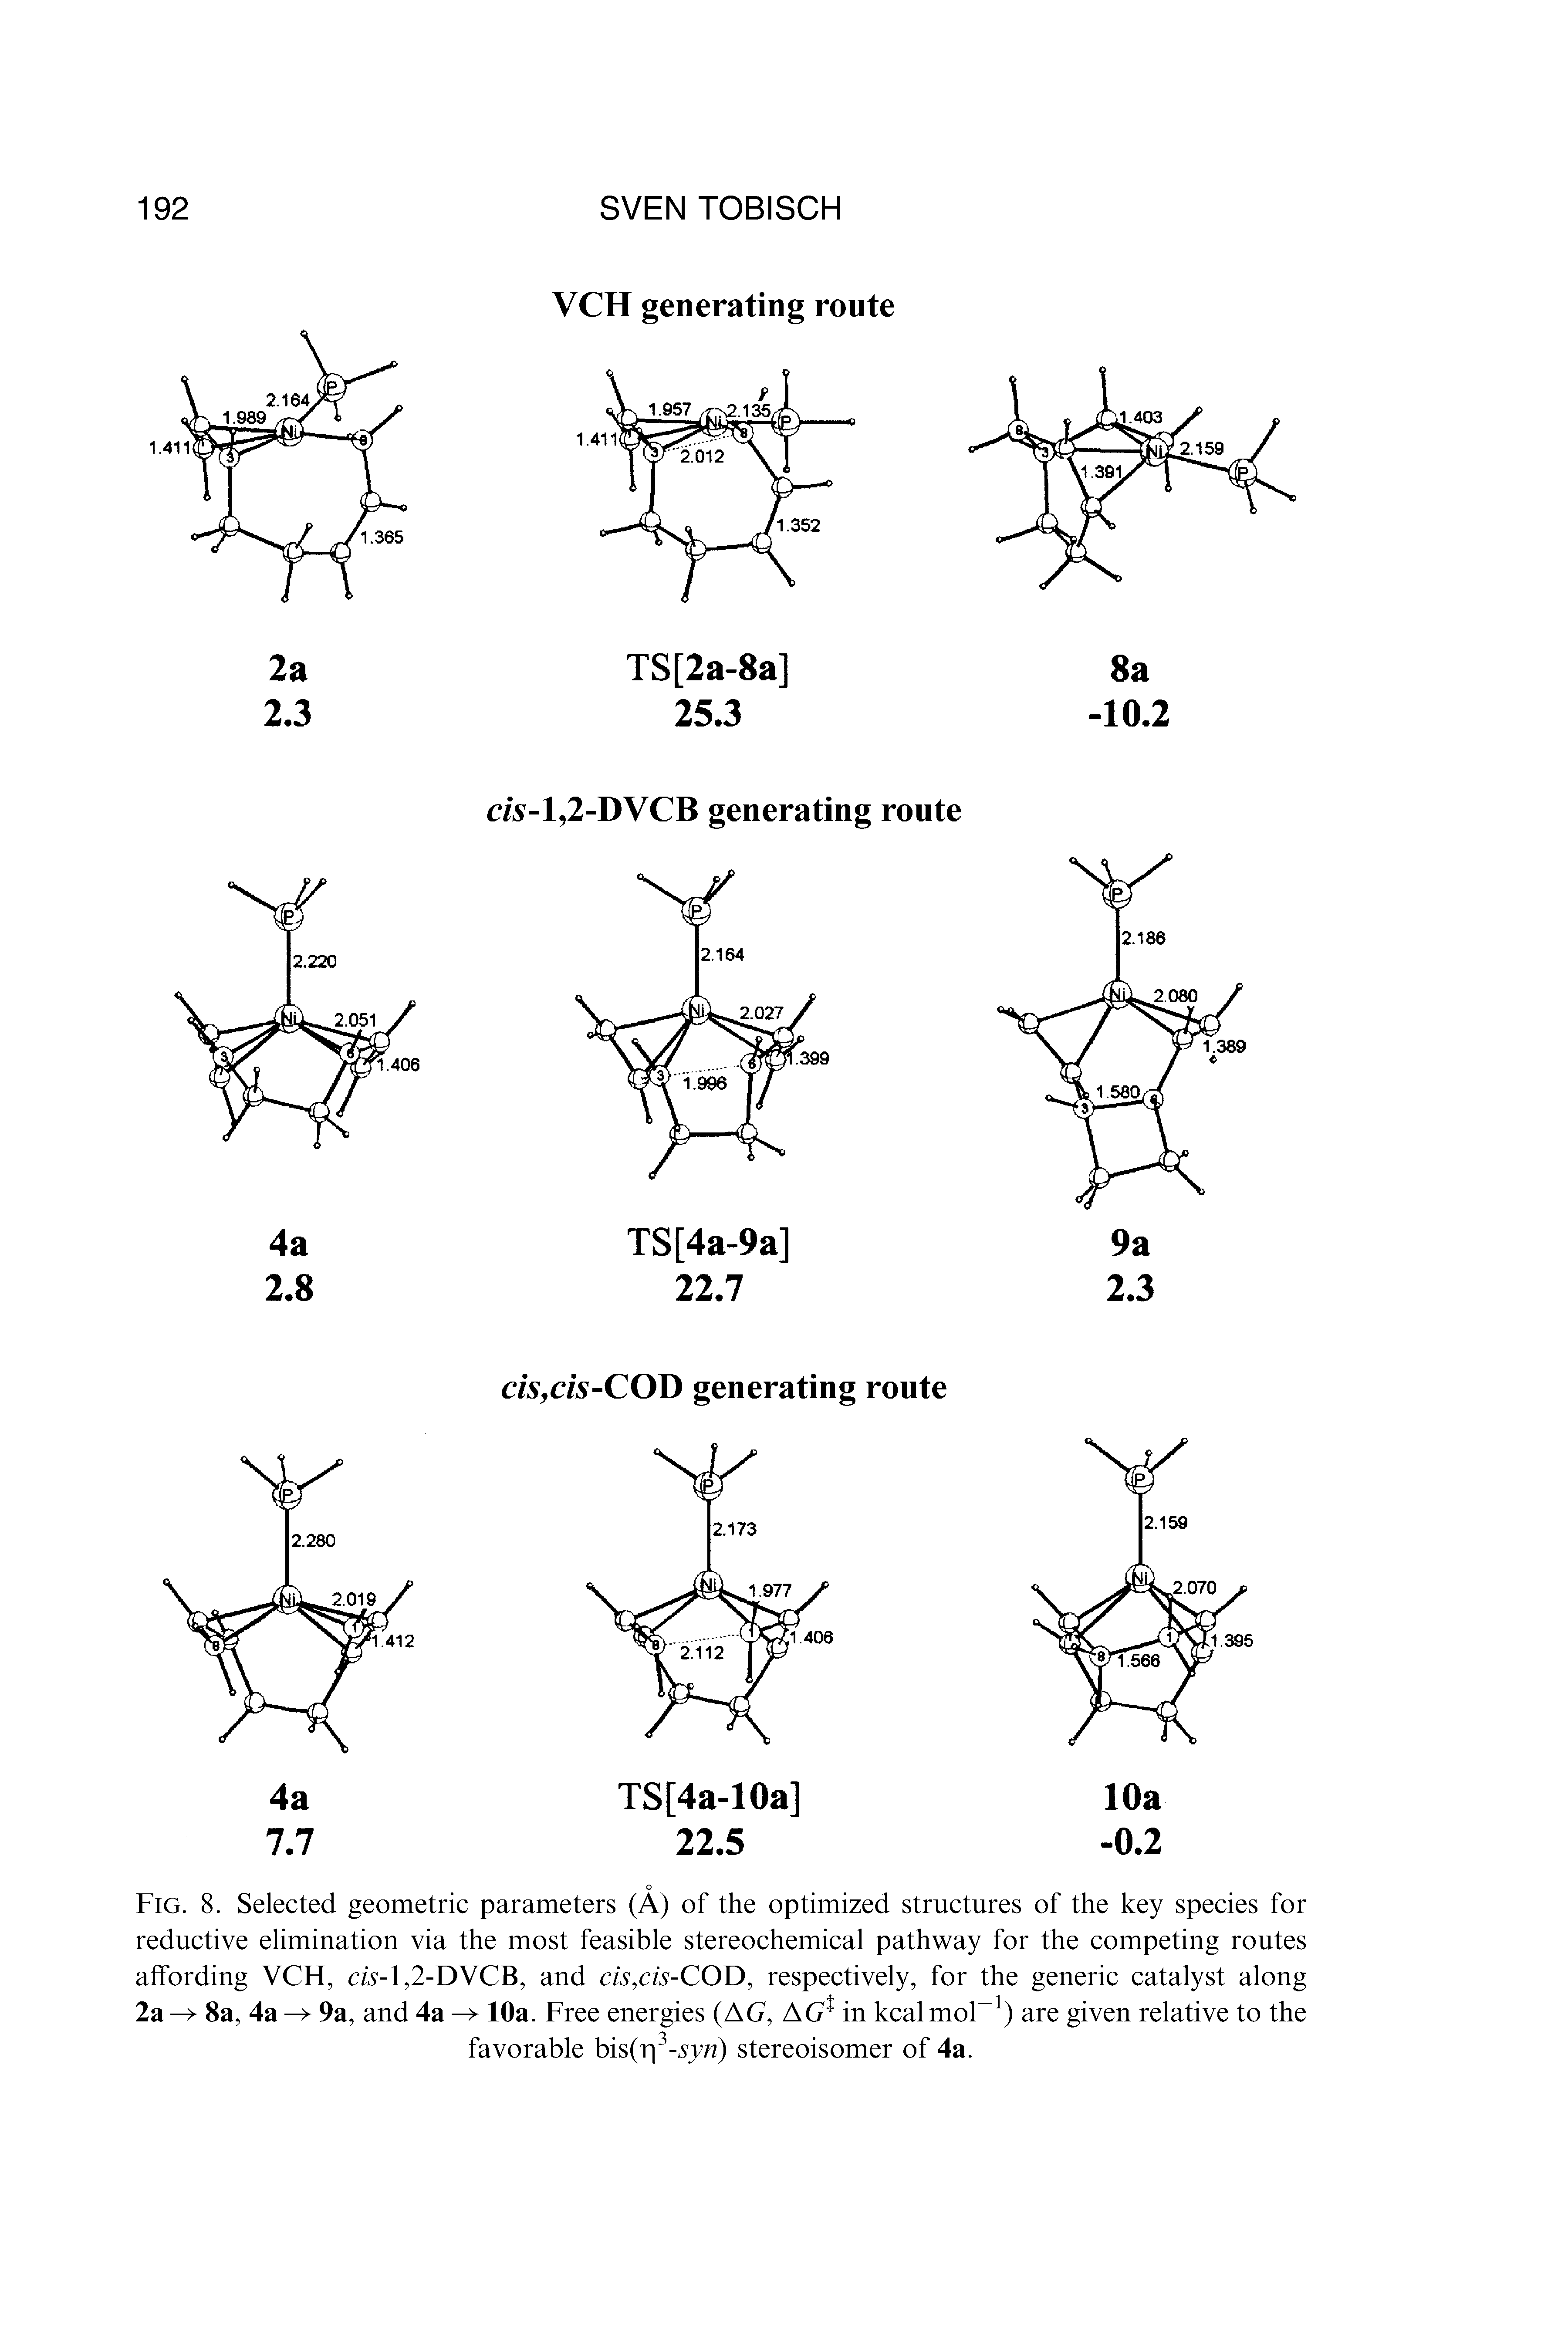 Fig. 8. Selected geometric parameters (A) of the optimized structures of the key species for reductive elimination via the most feasible stereochemical pathway for the competing routes affording VCH, ds-l,2-DVCB, and cis,cis-COD, respectively, for the generic catalyst along 2a -> 8a, 4a -> 9a, and 4a -> 10a. Free energies (AG, AG in kcal mol-1) are given relative to the favorable bis(r 3-yyn) stereoisomer of 4a.